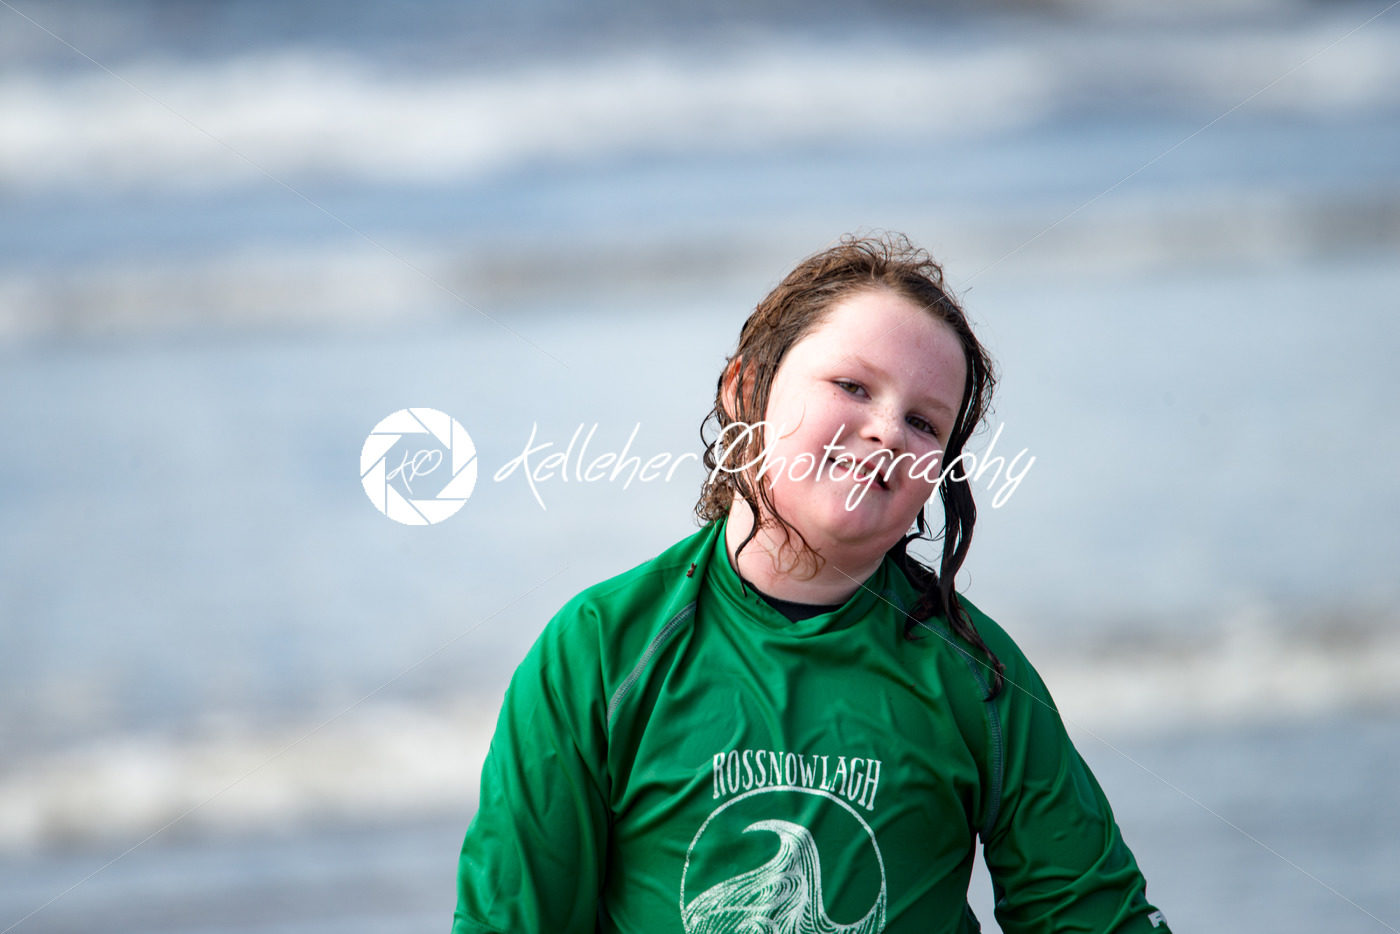 Young little girl on beach taking surfing lessons - Kelleher Photography Store